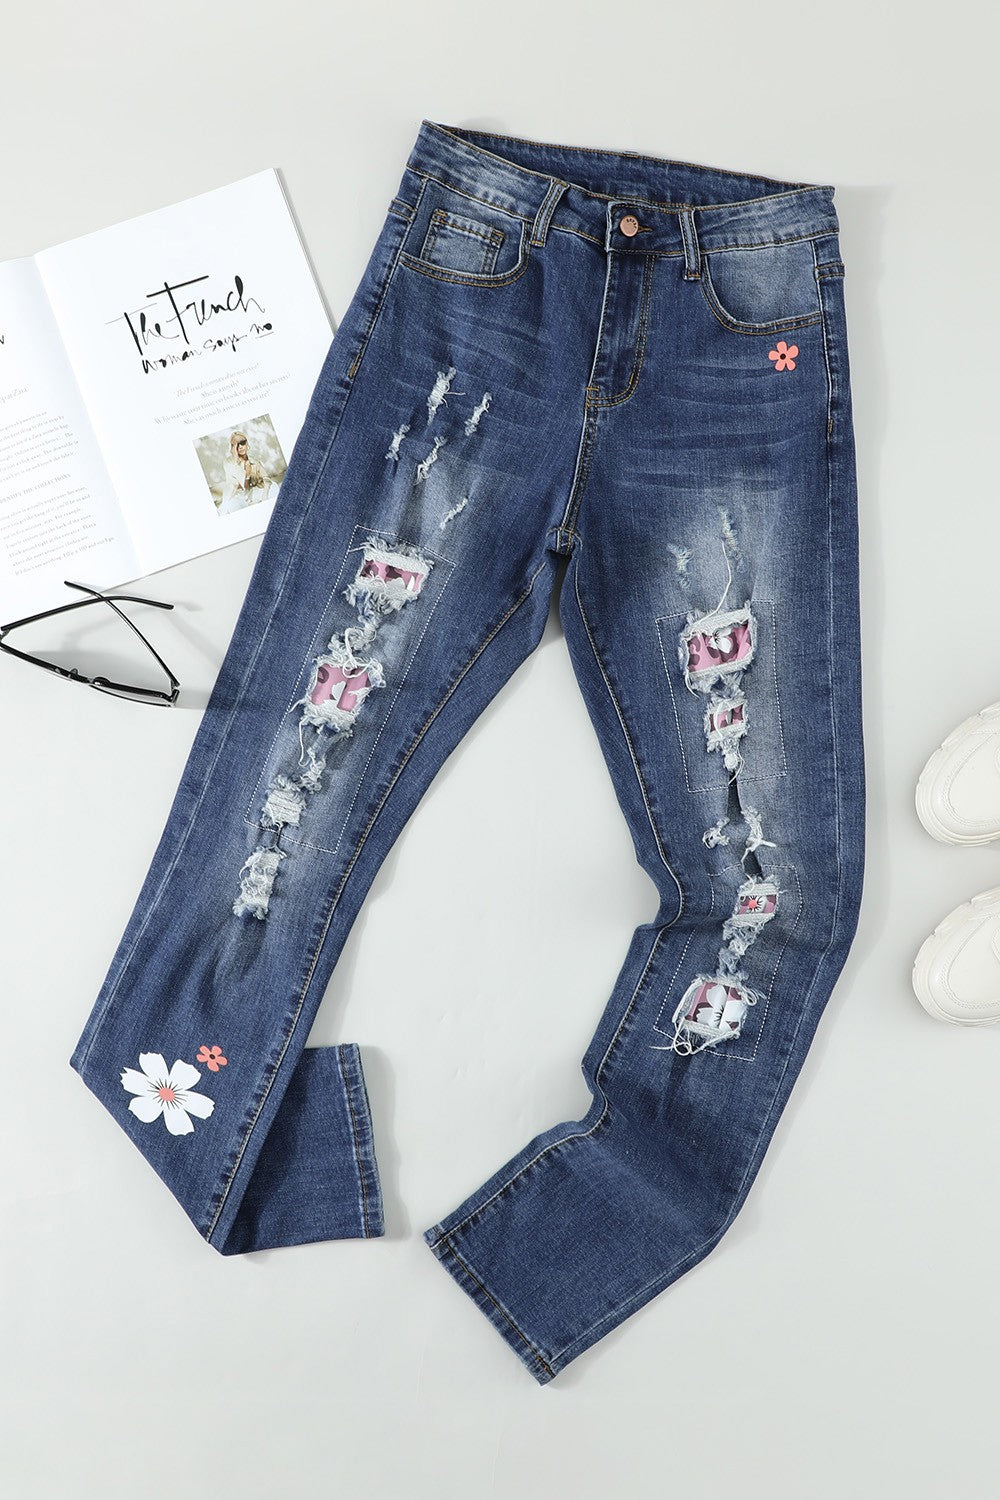 Distressed Buttoned Jeans with Pockets Bottom wear